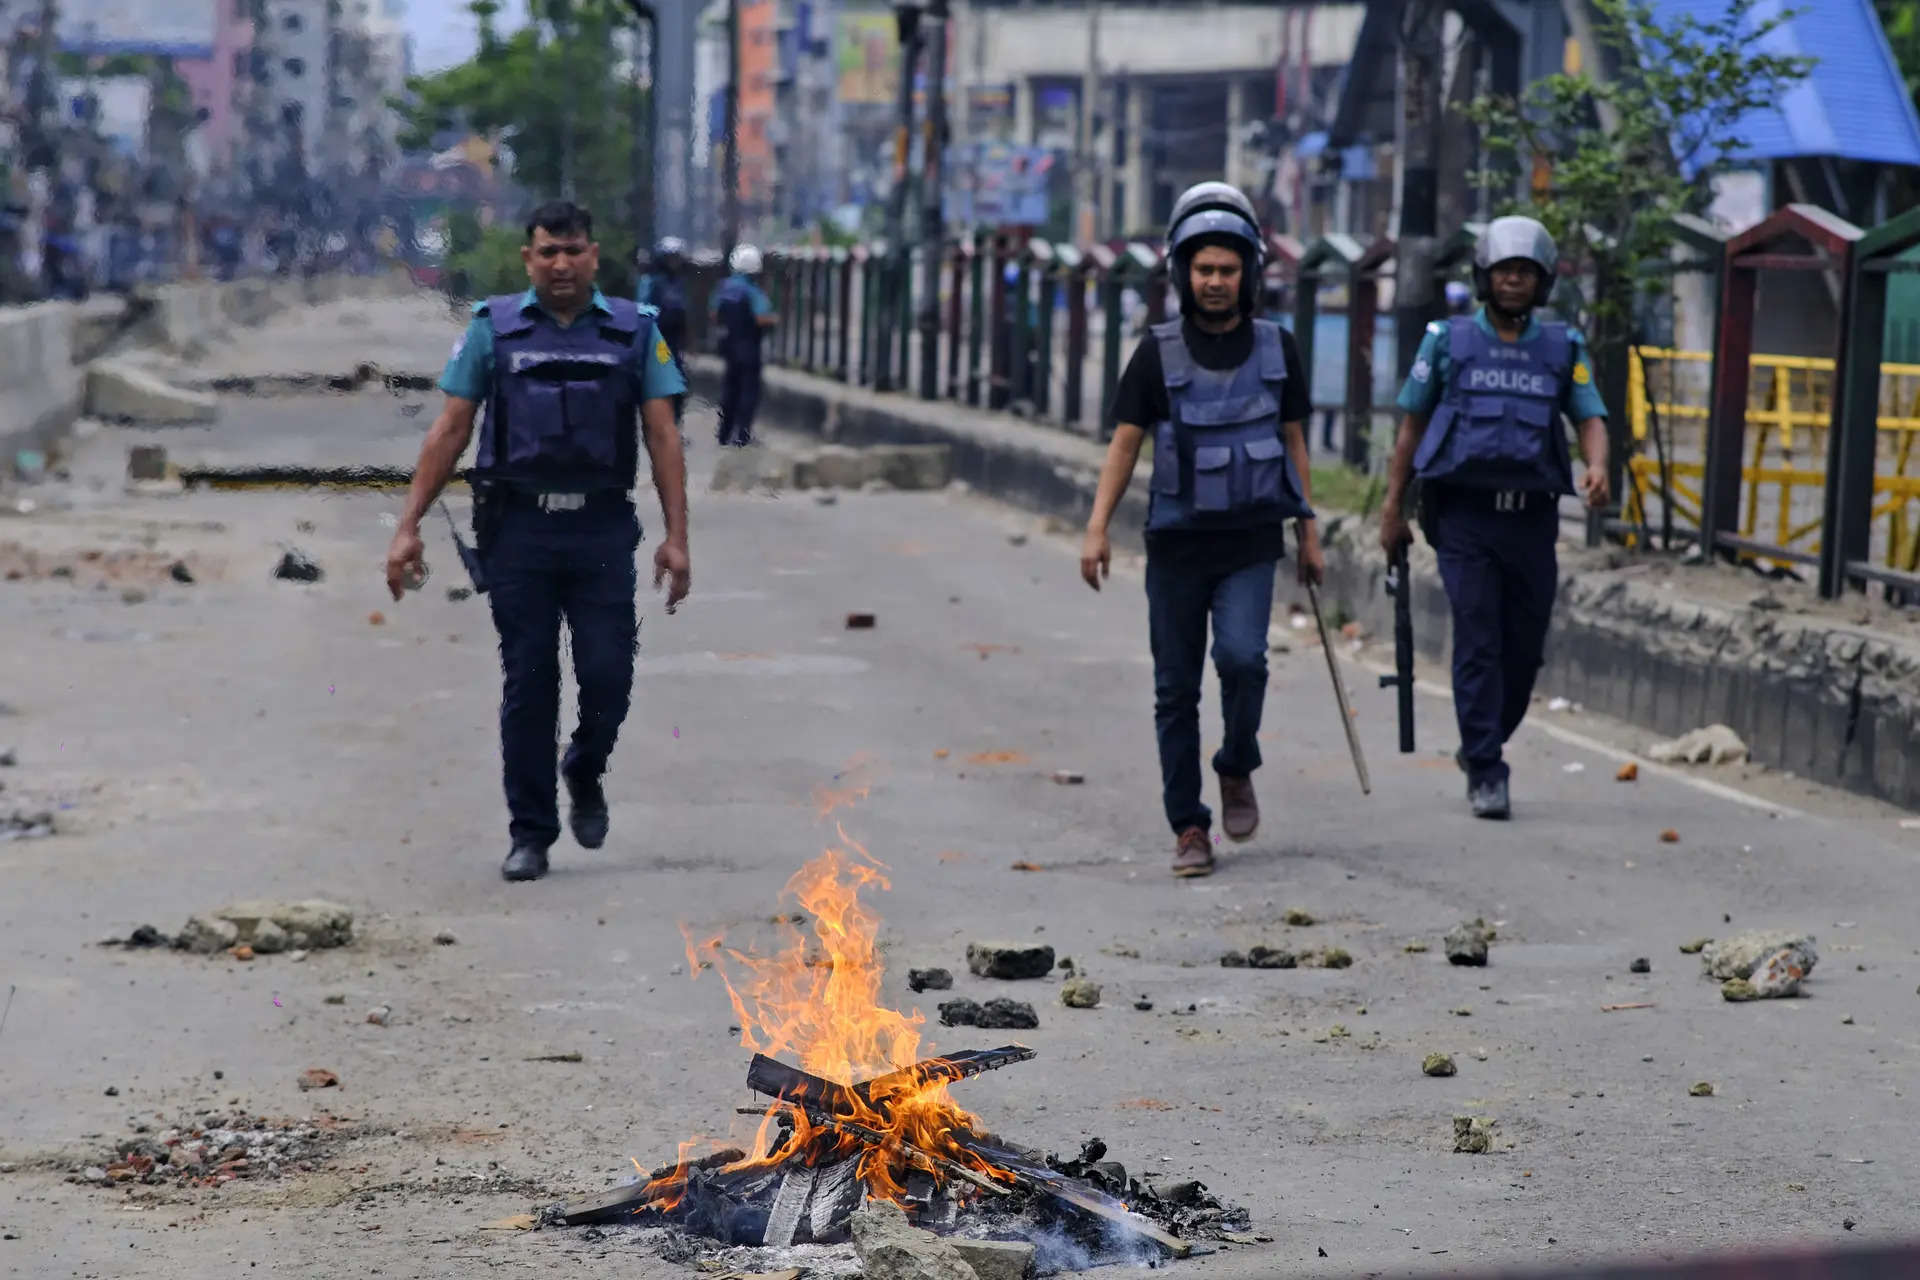 Diplomats confront Bangladesh foreign minister over violence 